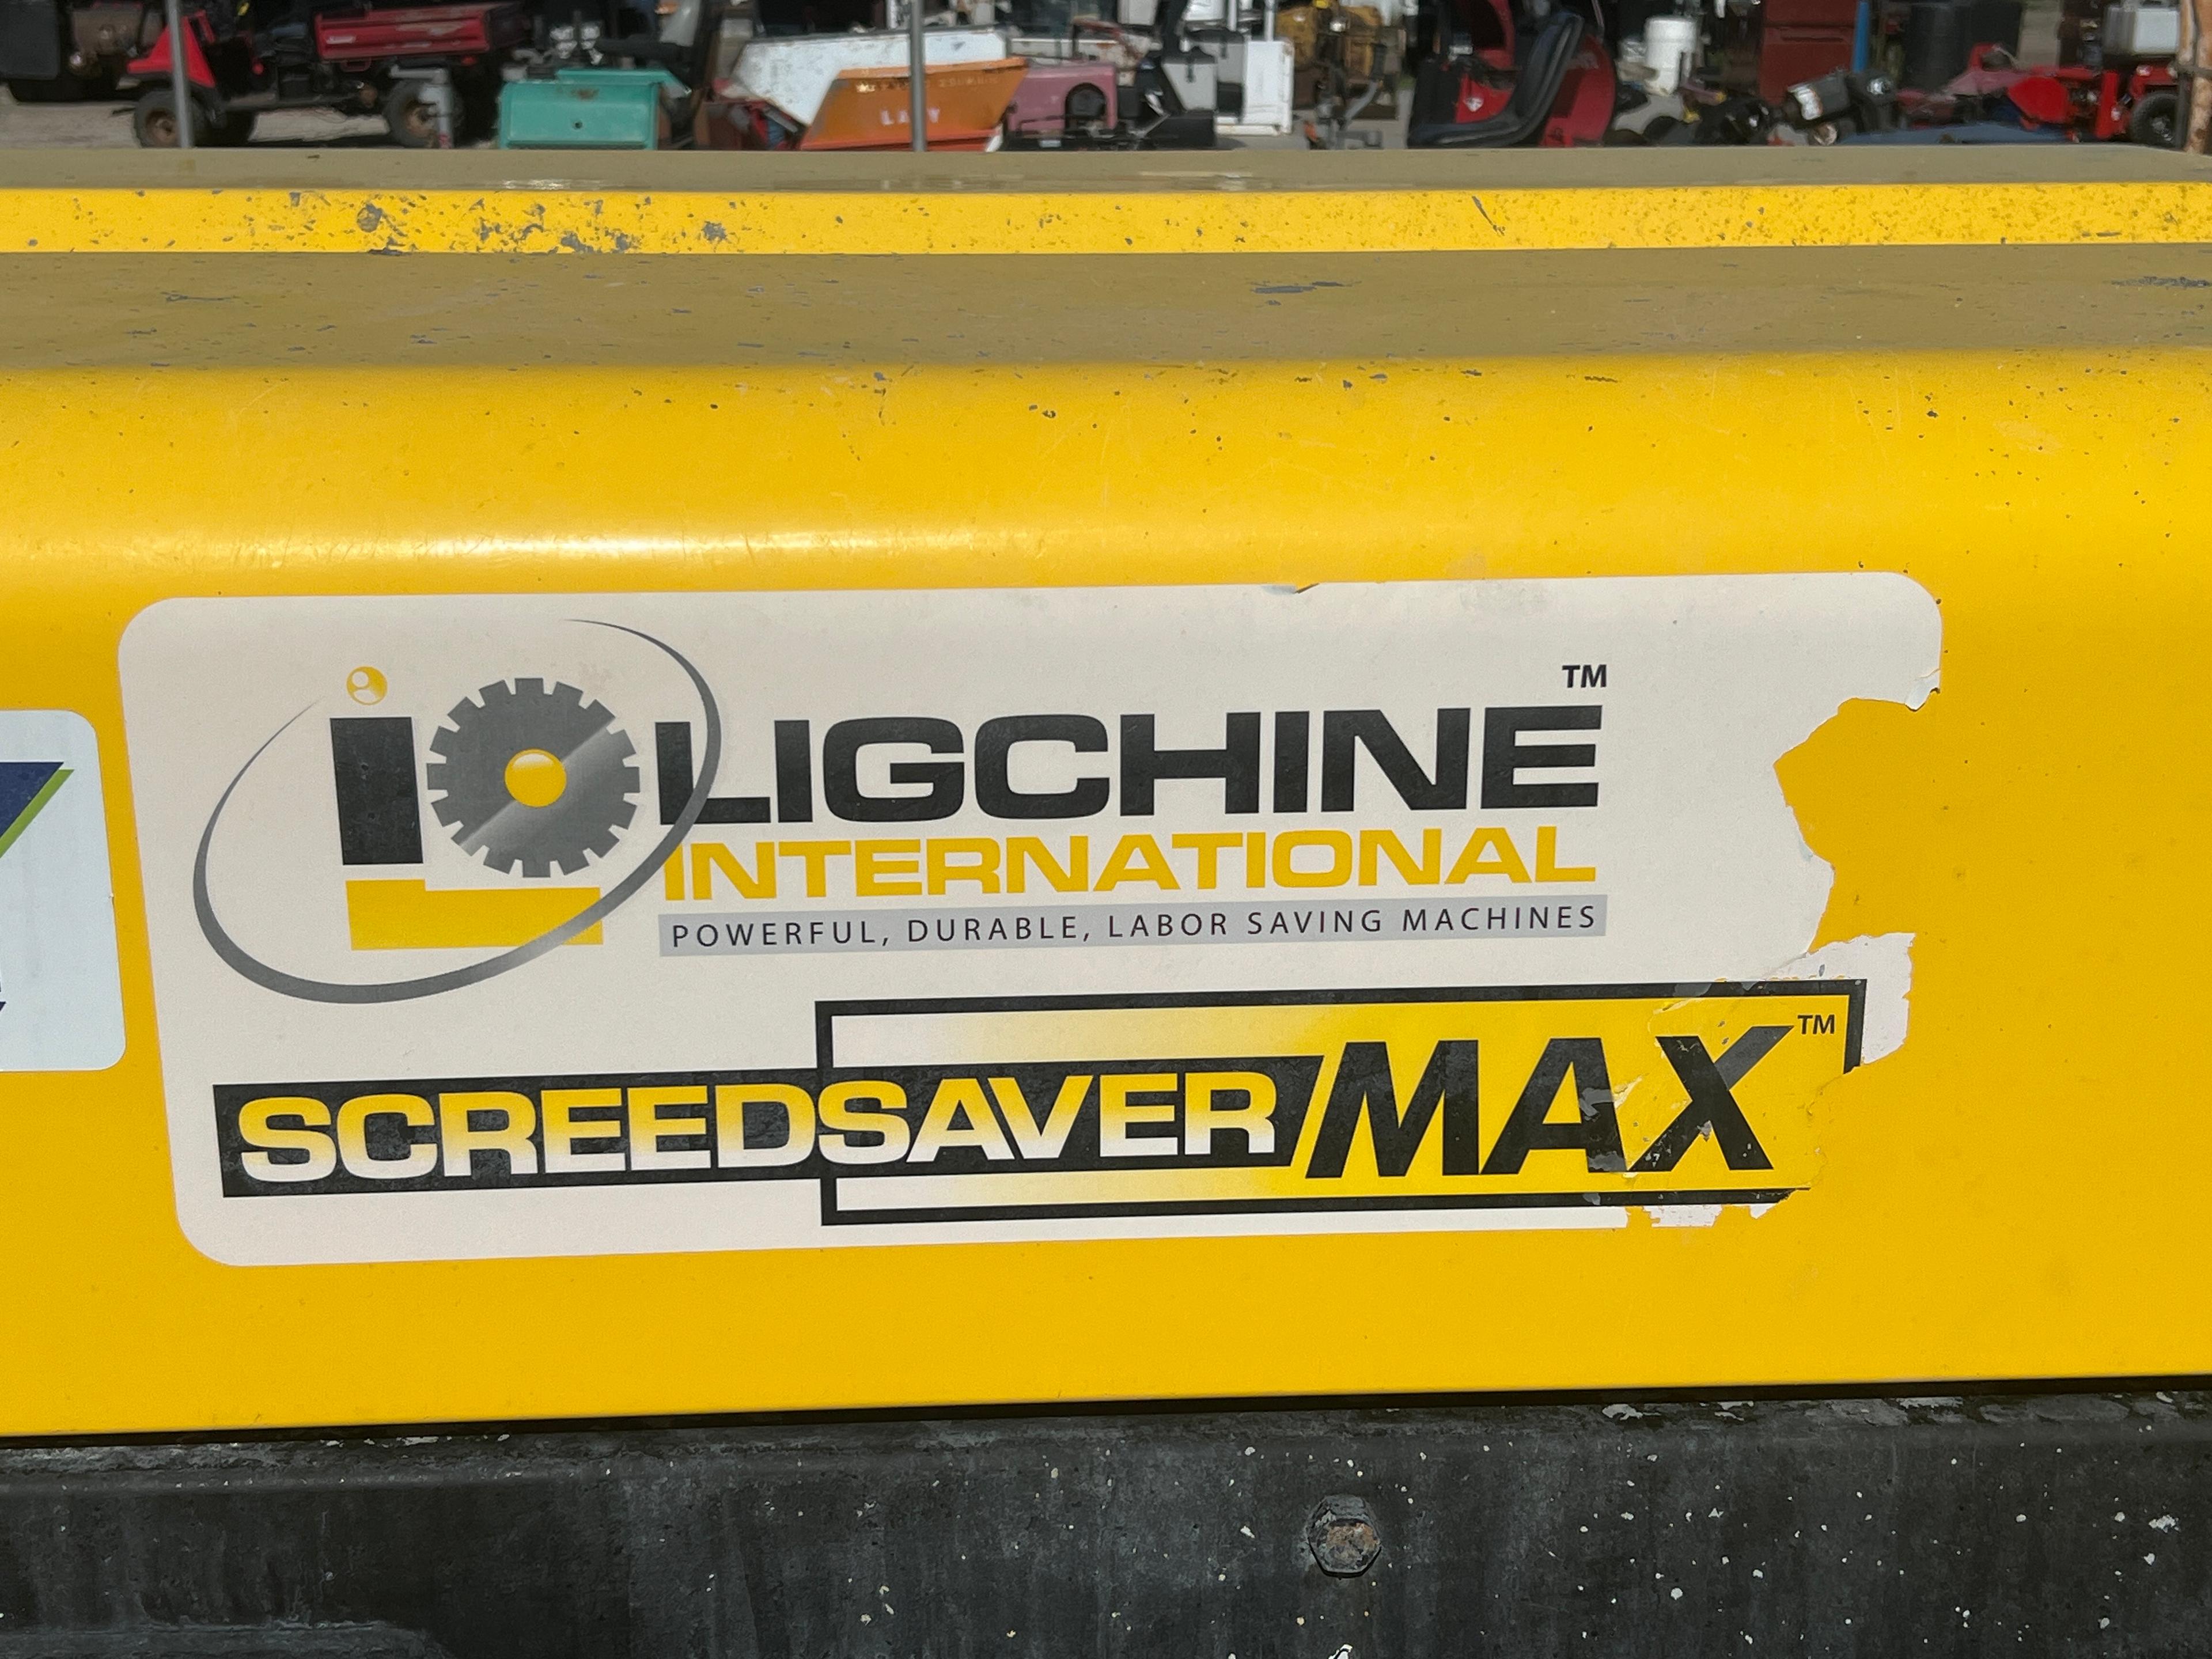 Ligchine Screed Saver Max Laser Guided with Full 3D Top Con Setup